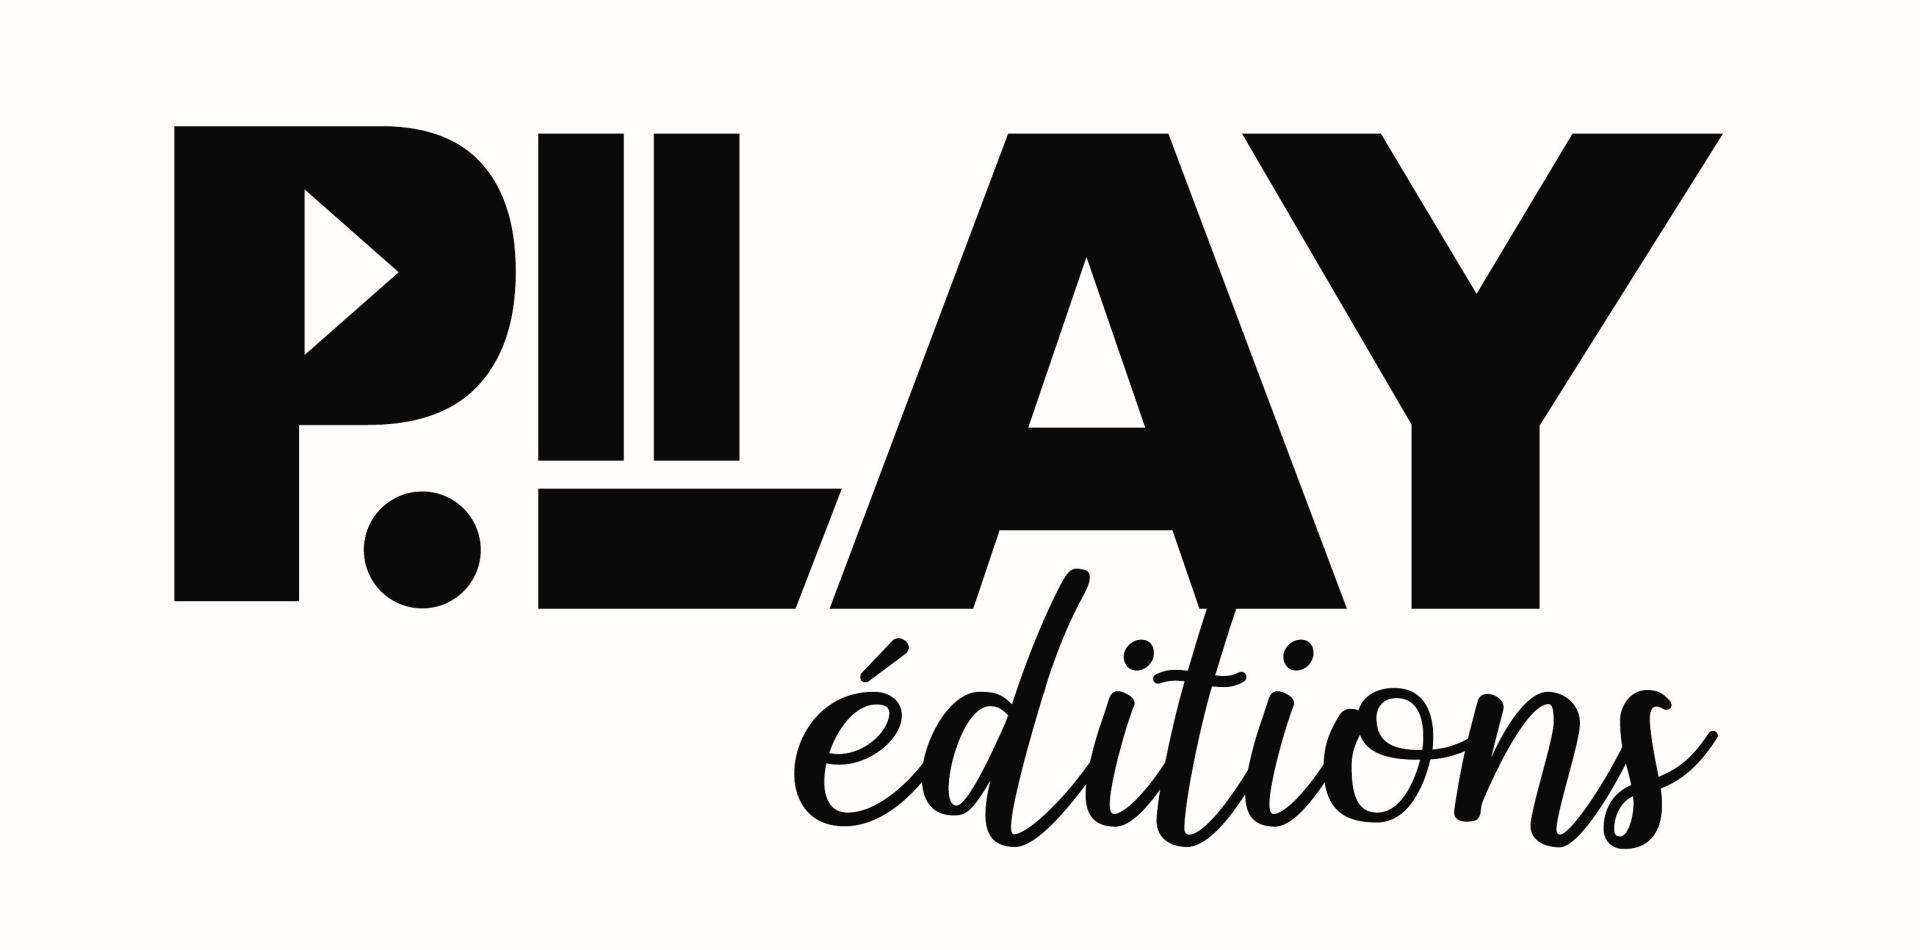 Play editions def 01 2